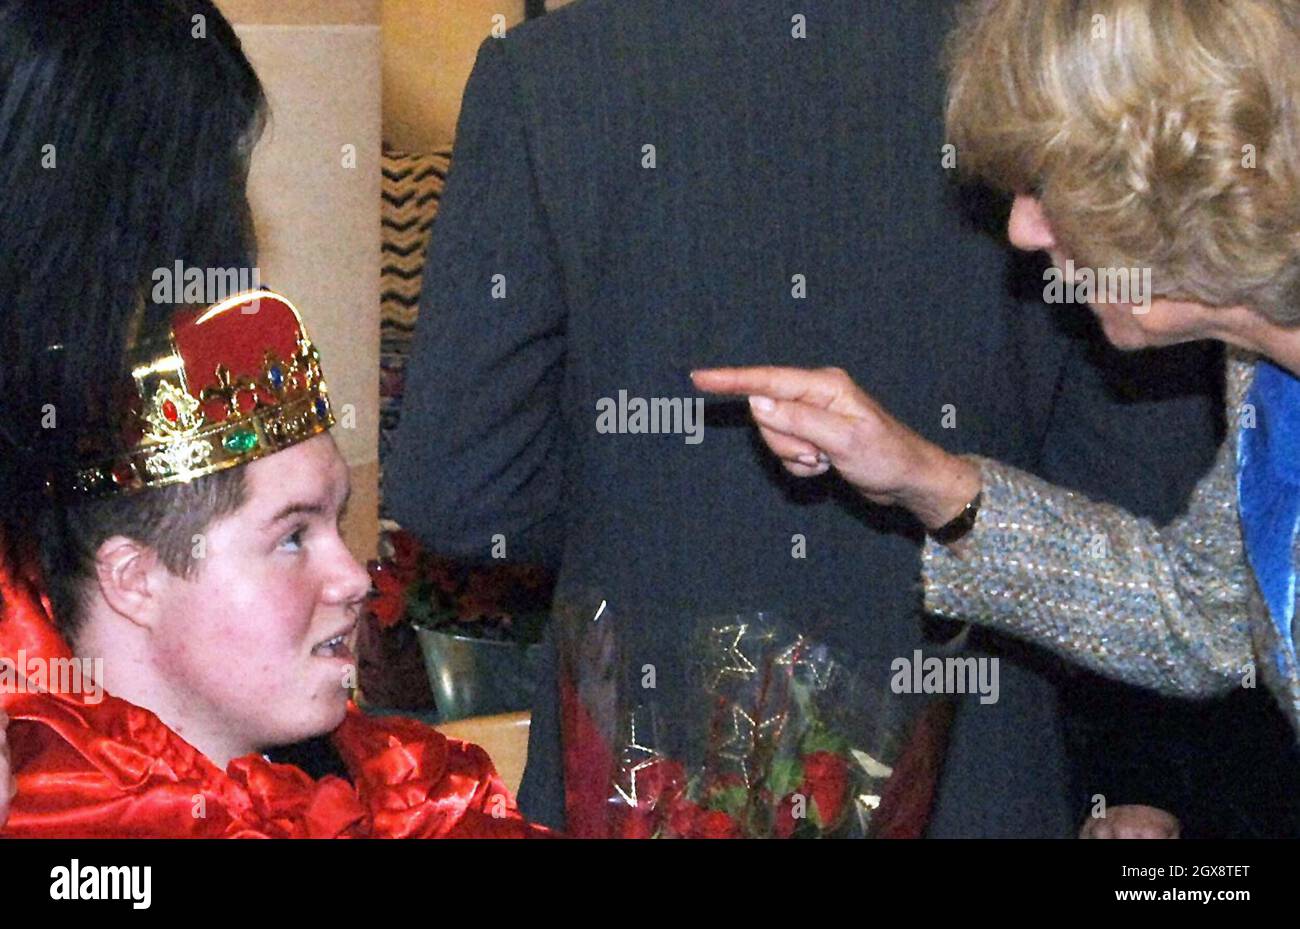 Duchess of Cornwall talks to Paul Parker, 15, at Highgrove House, Tetbury, Gloucestershire. Ten excited youngsters were invited to the Prince's Highgrove estate in Gloucestershire to help the Royal couple decorate their Christmas tree. Charles and Camilla spent nearly an hour chatting and joking with the children, who were all being cared for at the Ty Hafan children's hospice in Barry, South Wales. Anwar Hussein/allactiondigital.com  Stock Photo